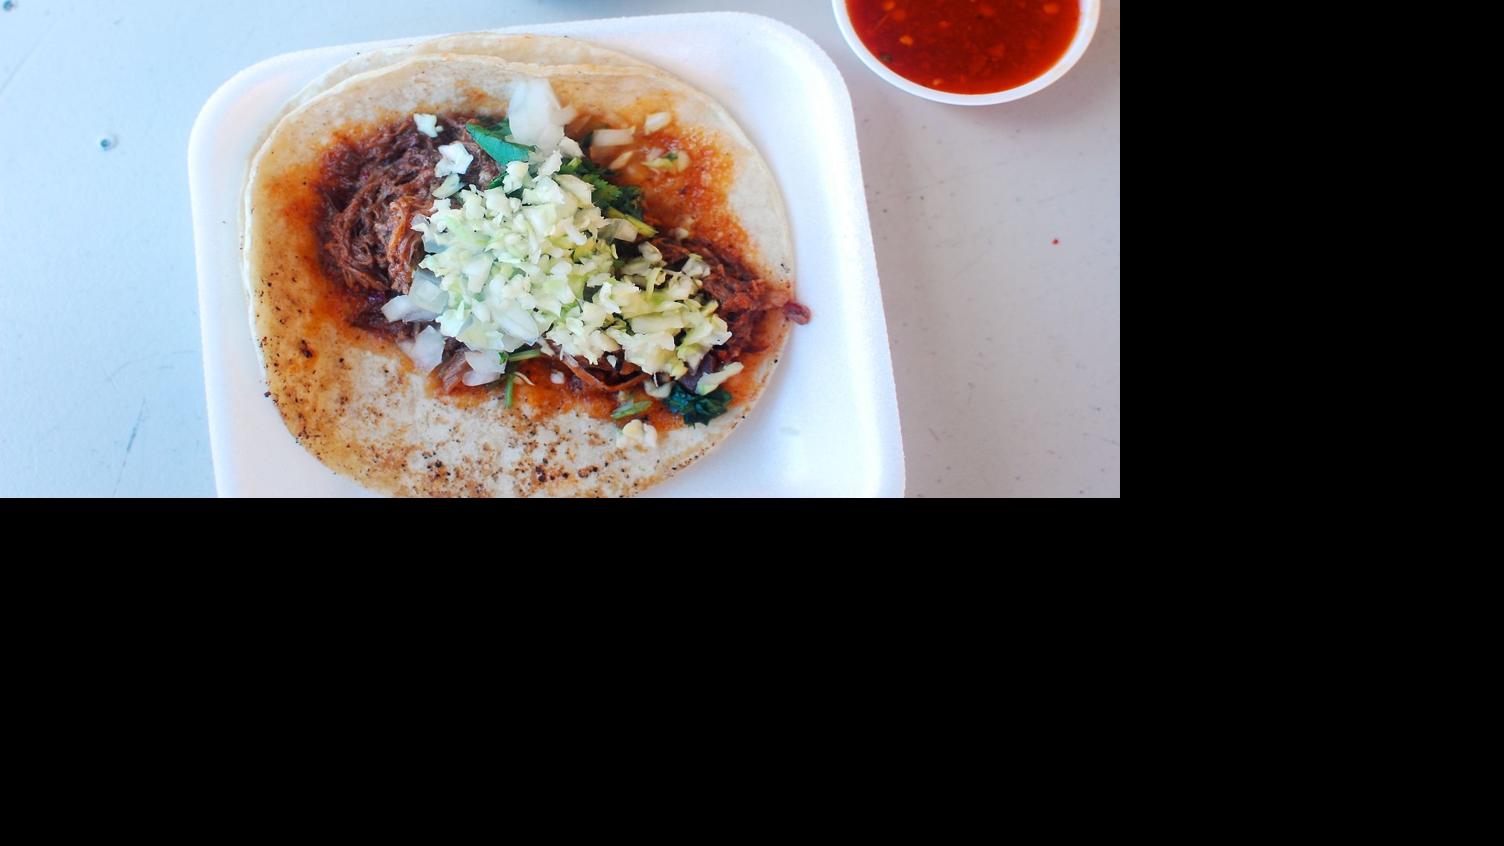 Taco No. 3: In the running for Tucson's best birria